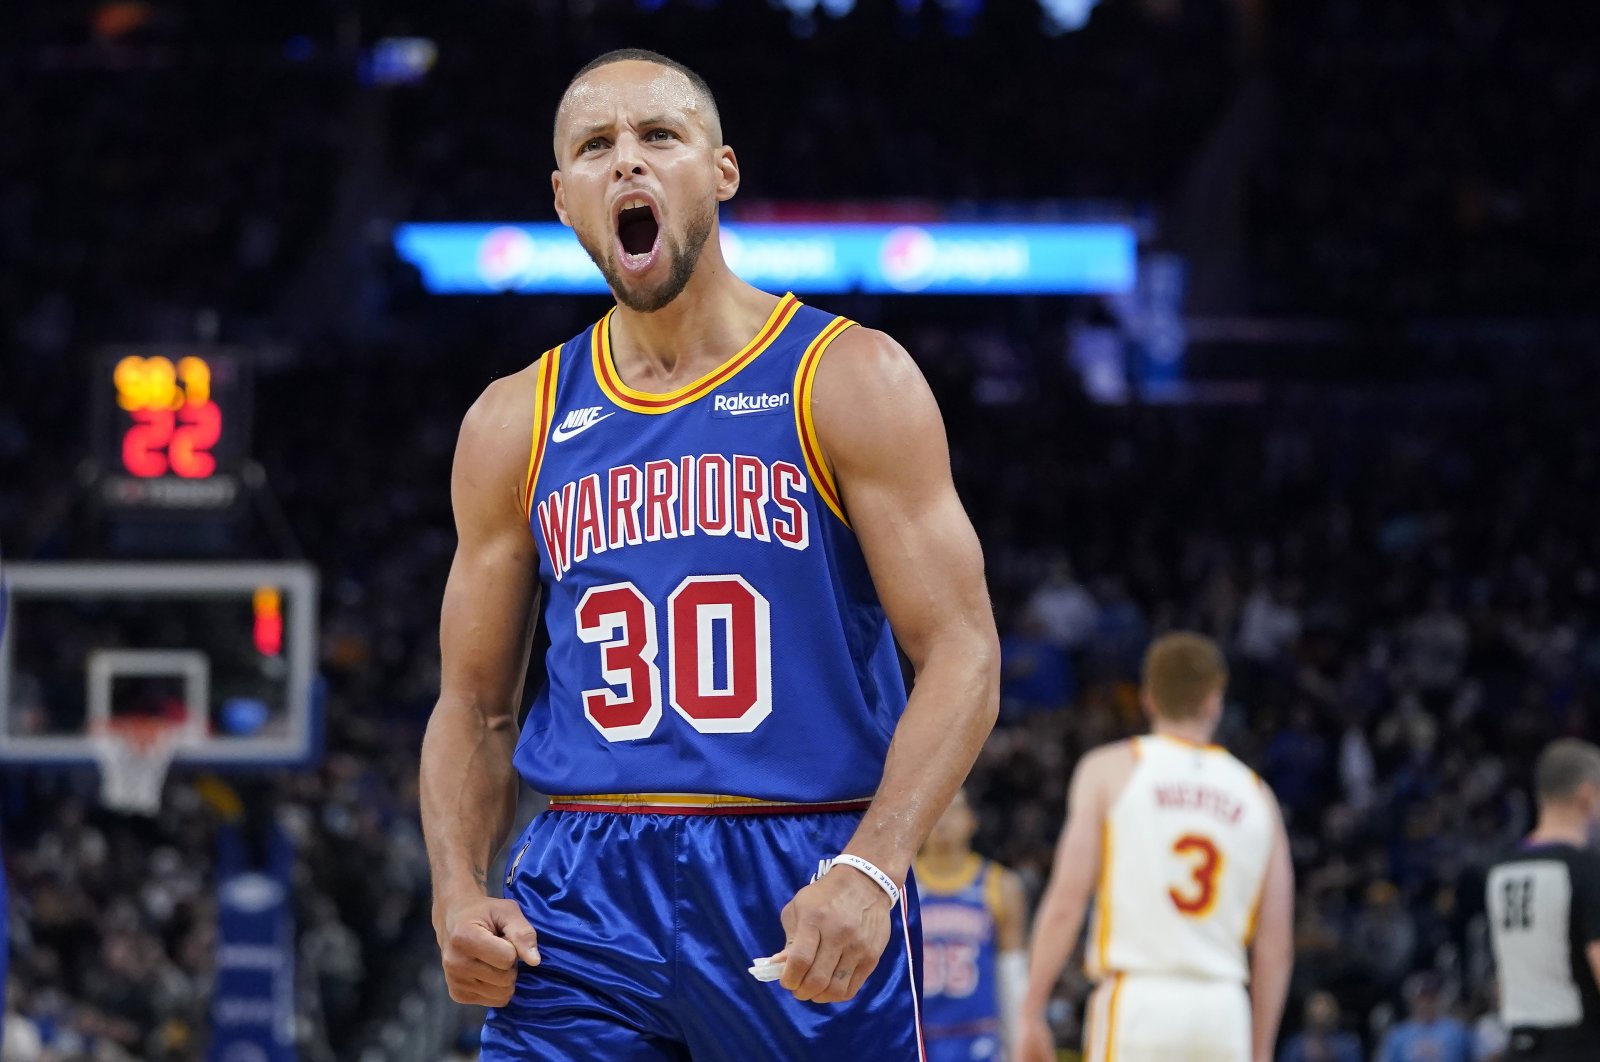 Golden State Warriors guard Stephen Curry reacts during an NBA game against the Atlanta Hawks in San Francisco, U.S., Nov. 8, 2021. (AP Photo)